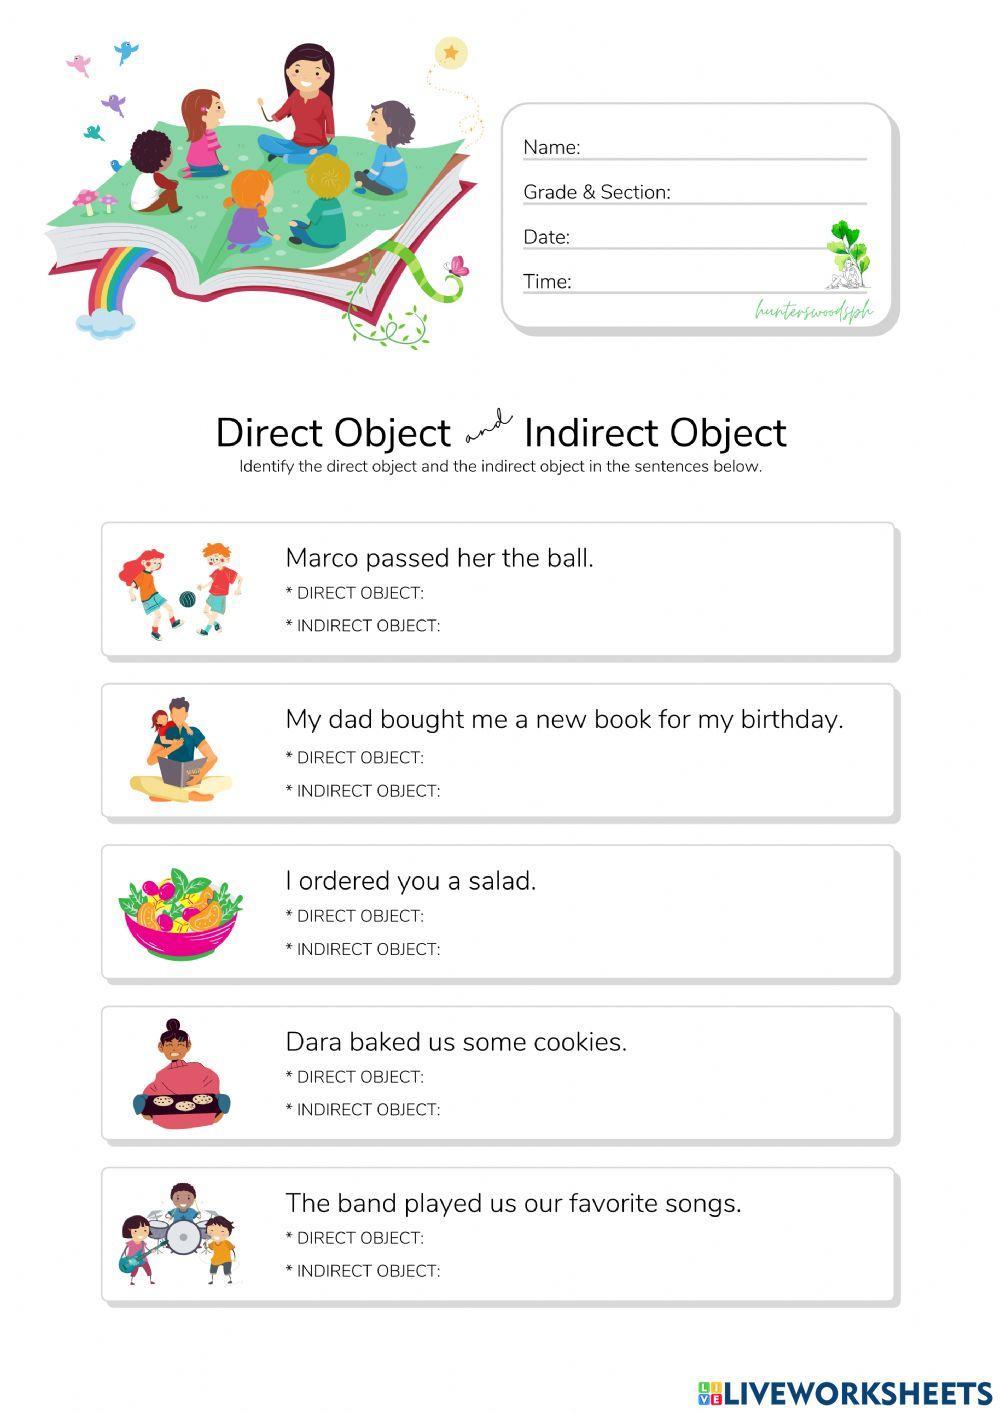 Direct and Indirect Object - HuntersWoodsPH.com Worksheet